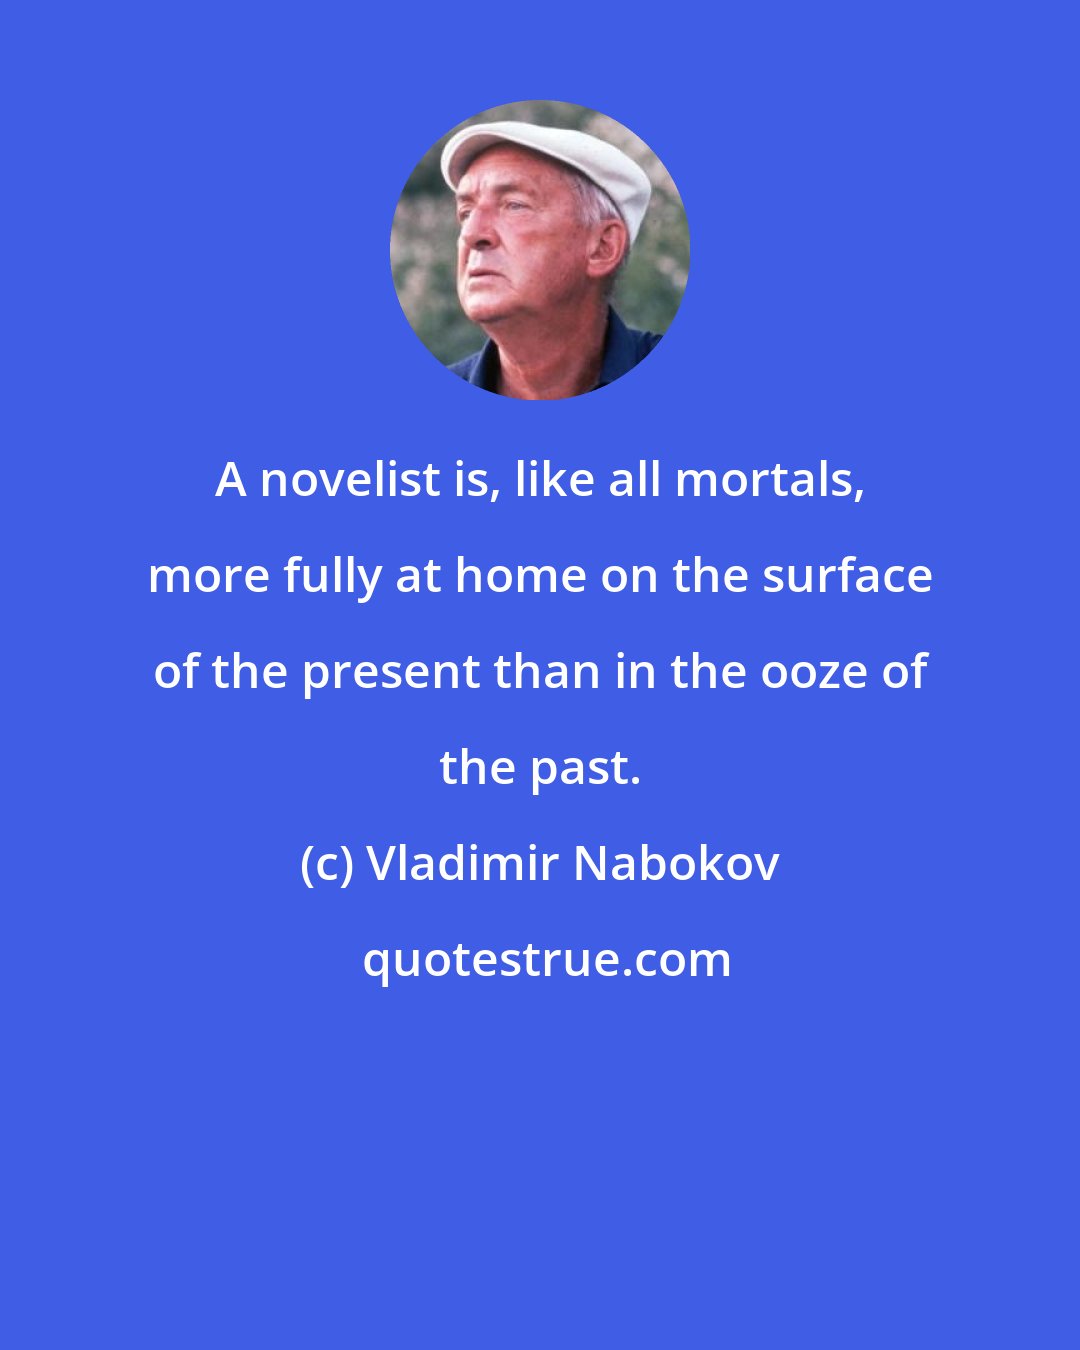 Vladimir Nabokov: A novelist is, like all mortals, more fully at home on the surface of the present than in the ooze of the past.